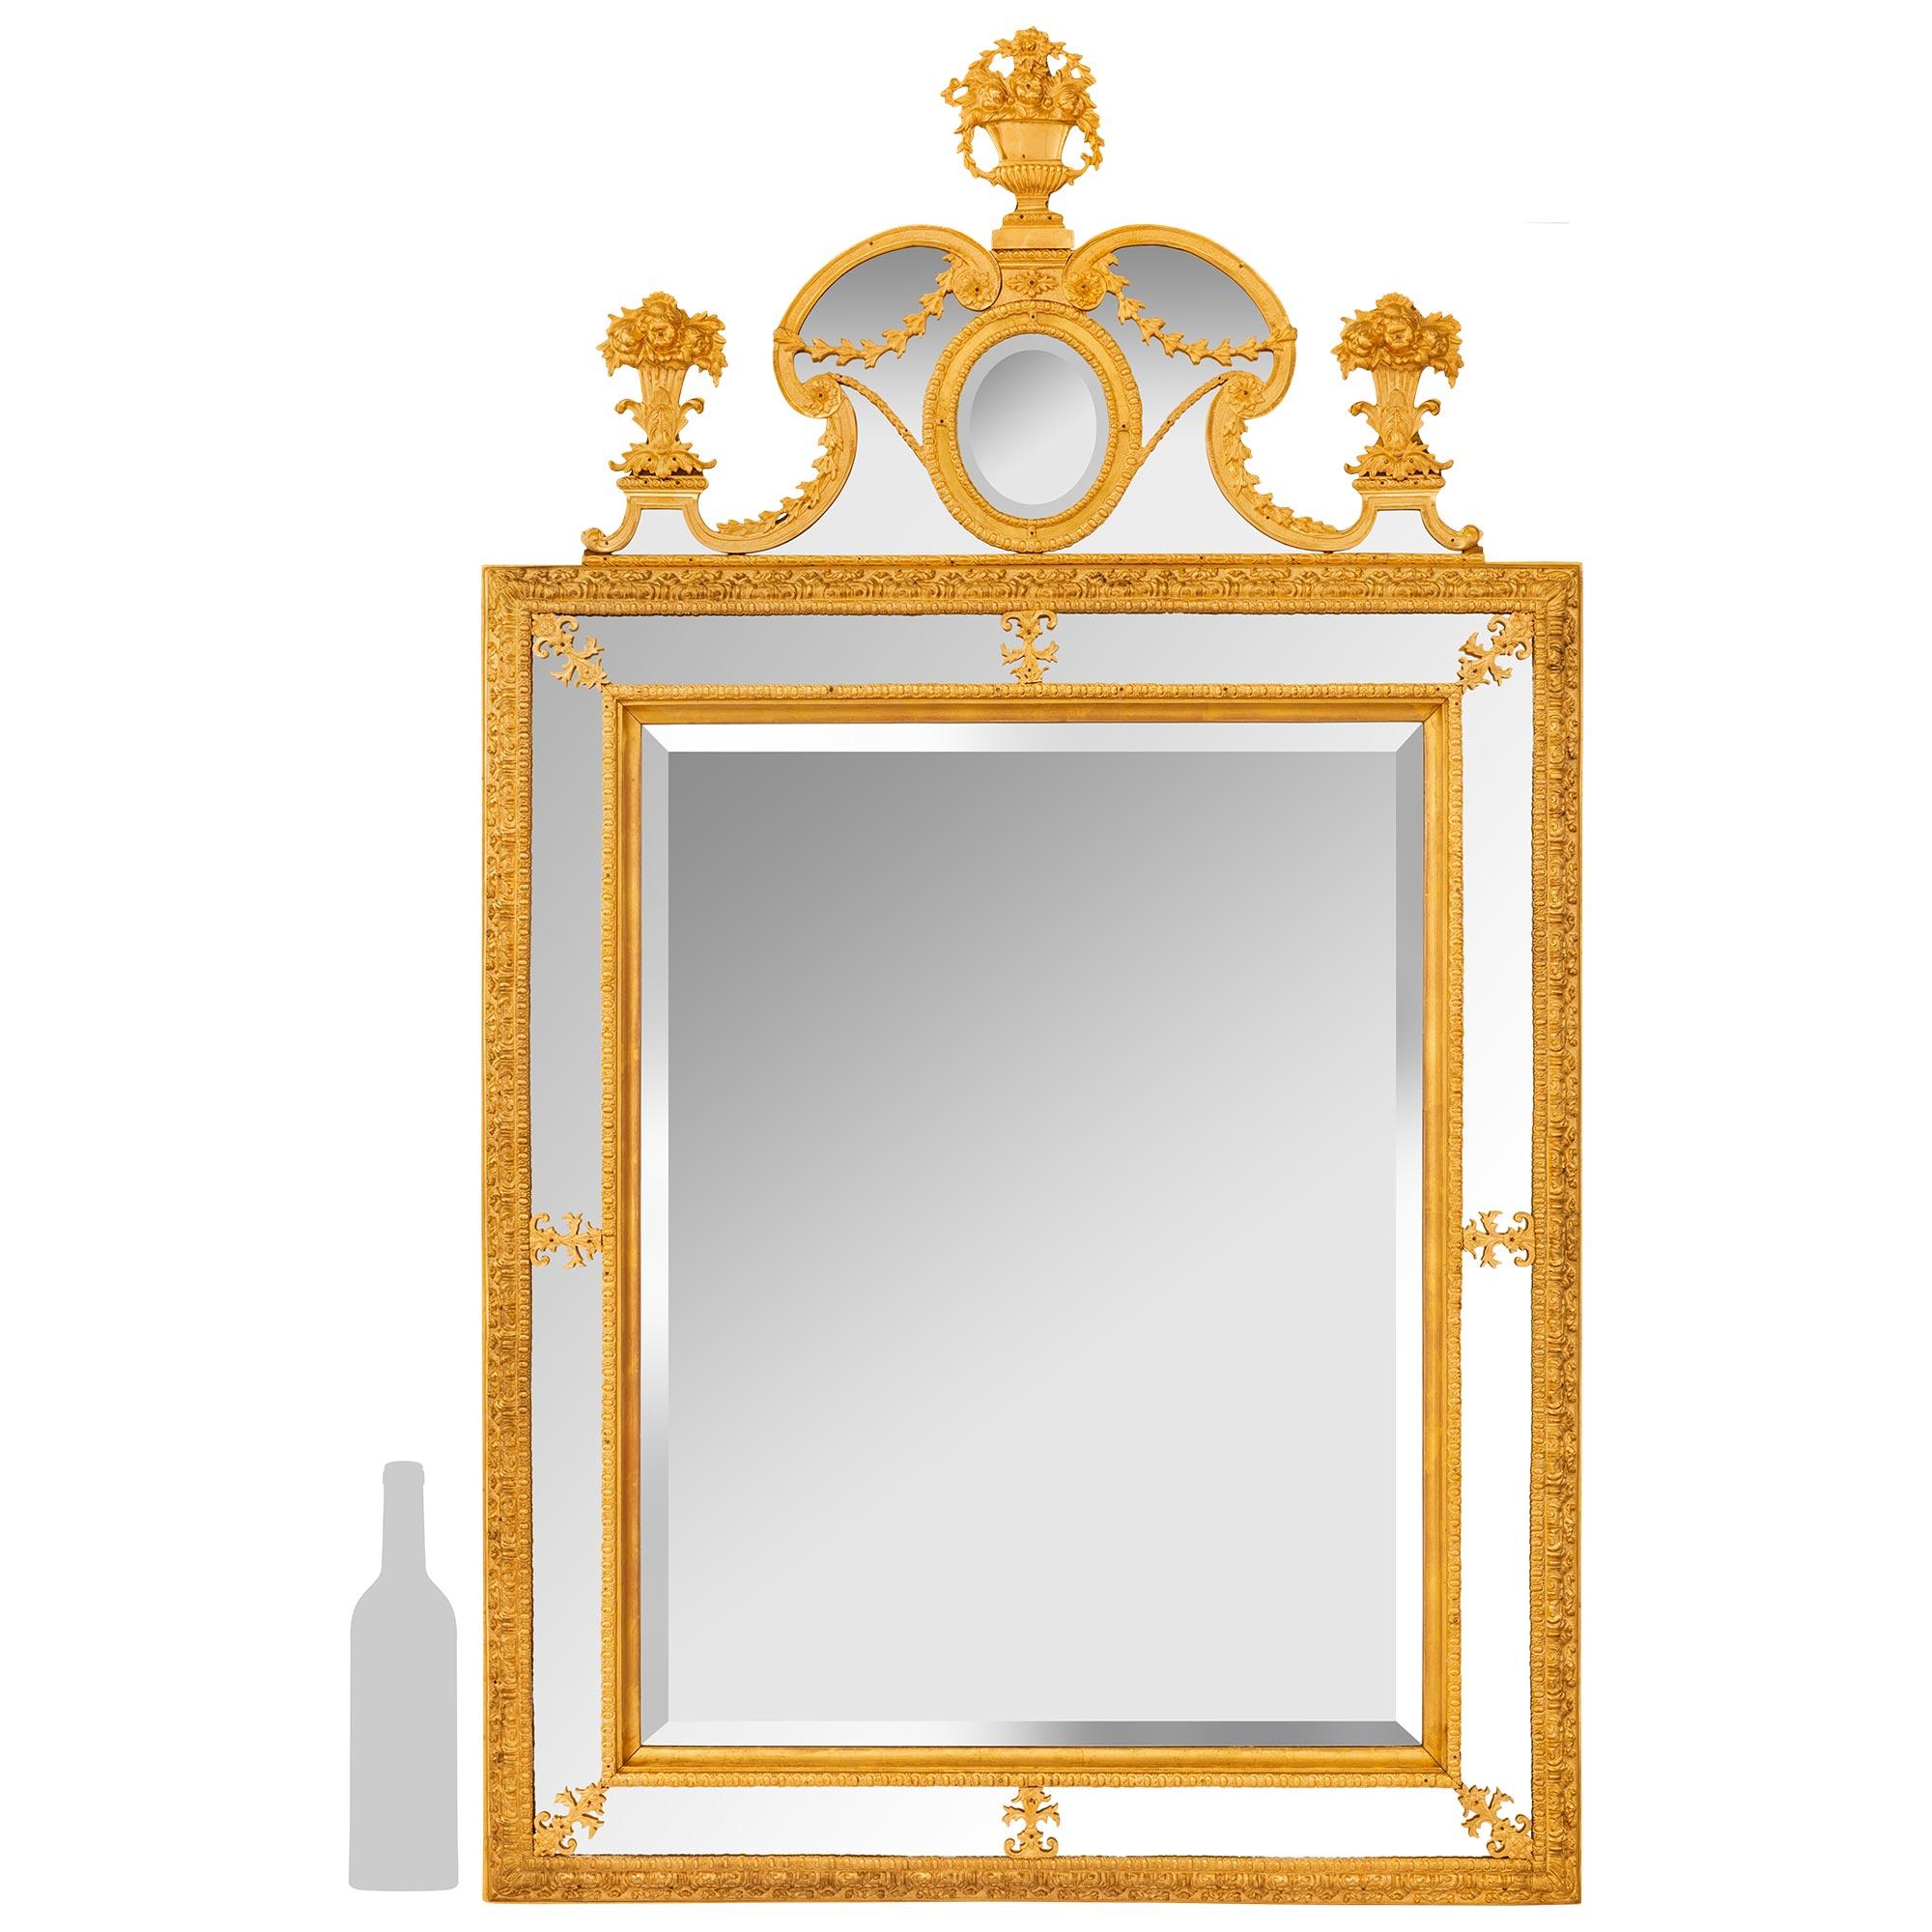 A sensational and high quality Swedish early 19th century Neo-Classical st. Ormolu mirror. The original central double framed beveled mirror plate is set within an Ormolu border with a foliate trim and palmettes accenting the center and corners of